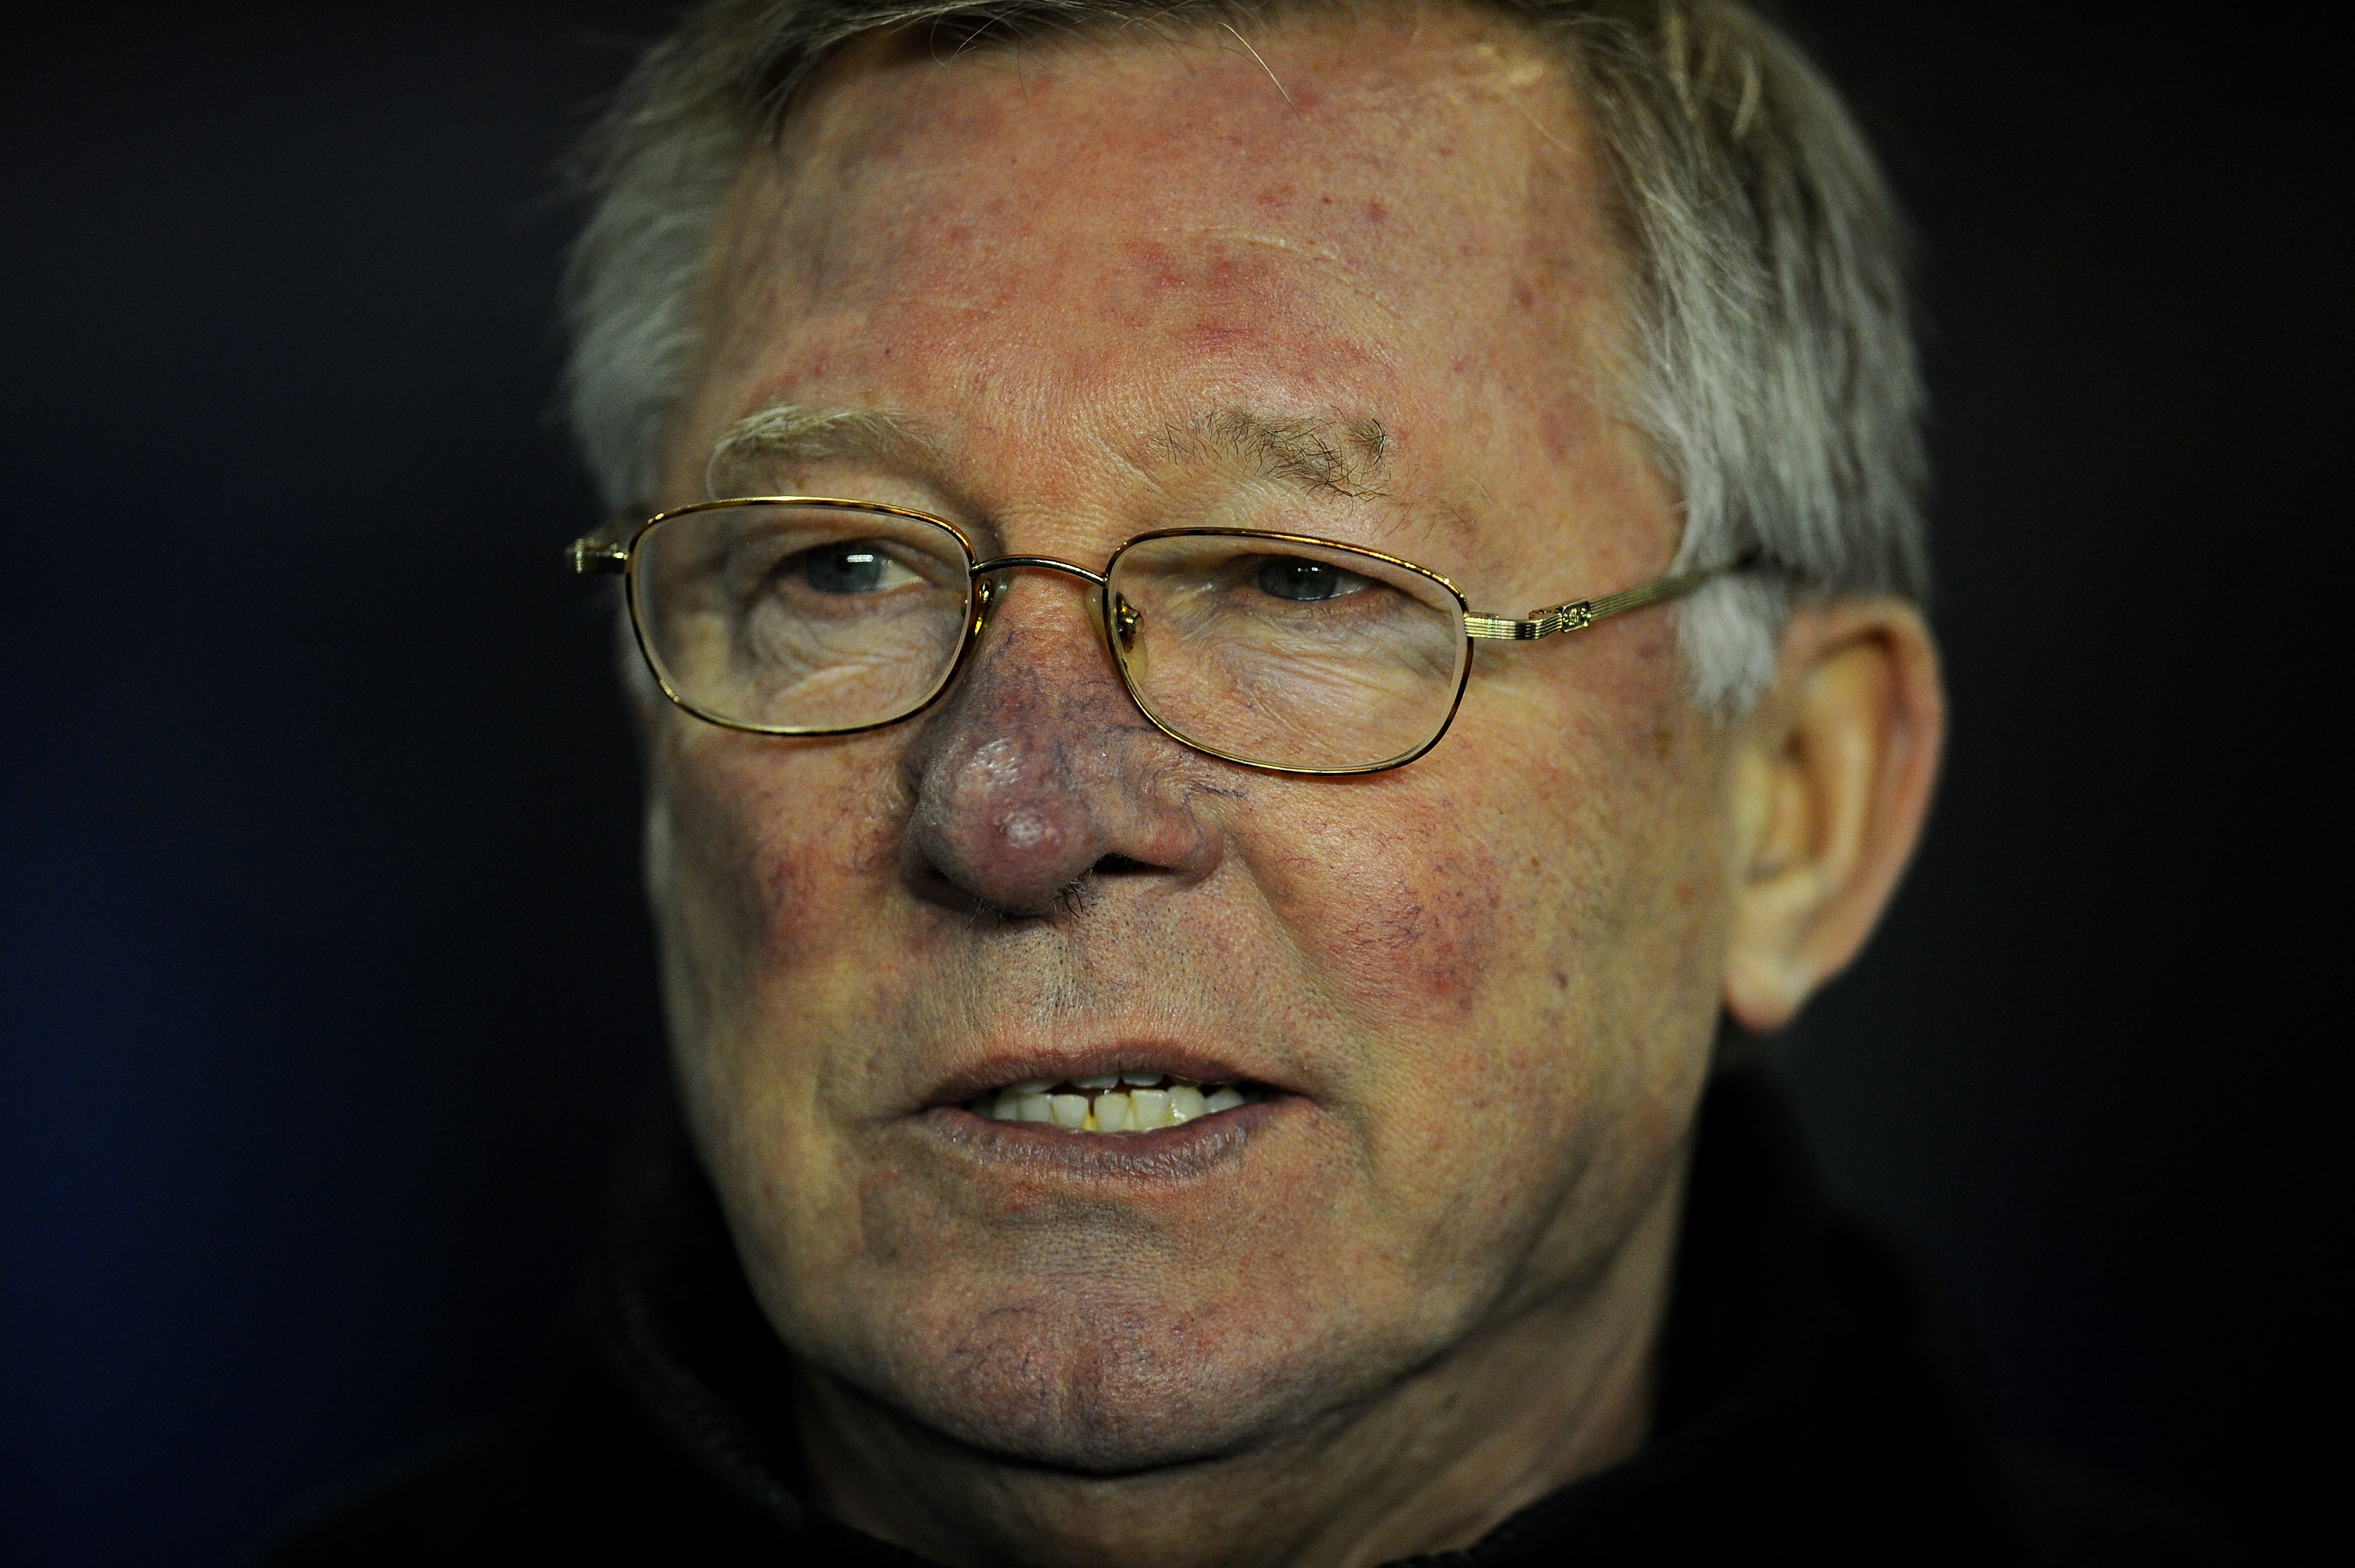 BIRMINGHAM, ENGLAND - DECEMBER 28:  Manchester United Manager Sir Alex Ferguson looks on prior to the Barclays Premier League match between Birmingham City and Manchester United at St Andrew's Stadium on December 28, 2010 in Birmingham, England.  (Photo b